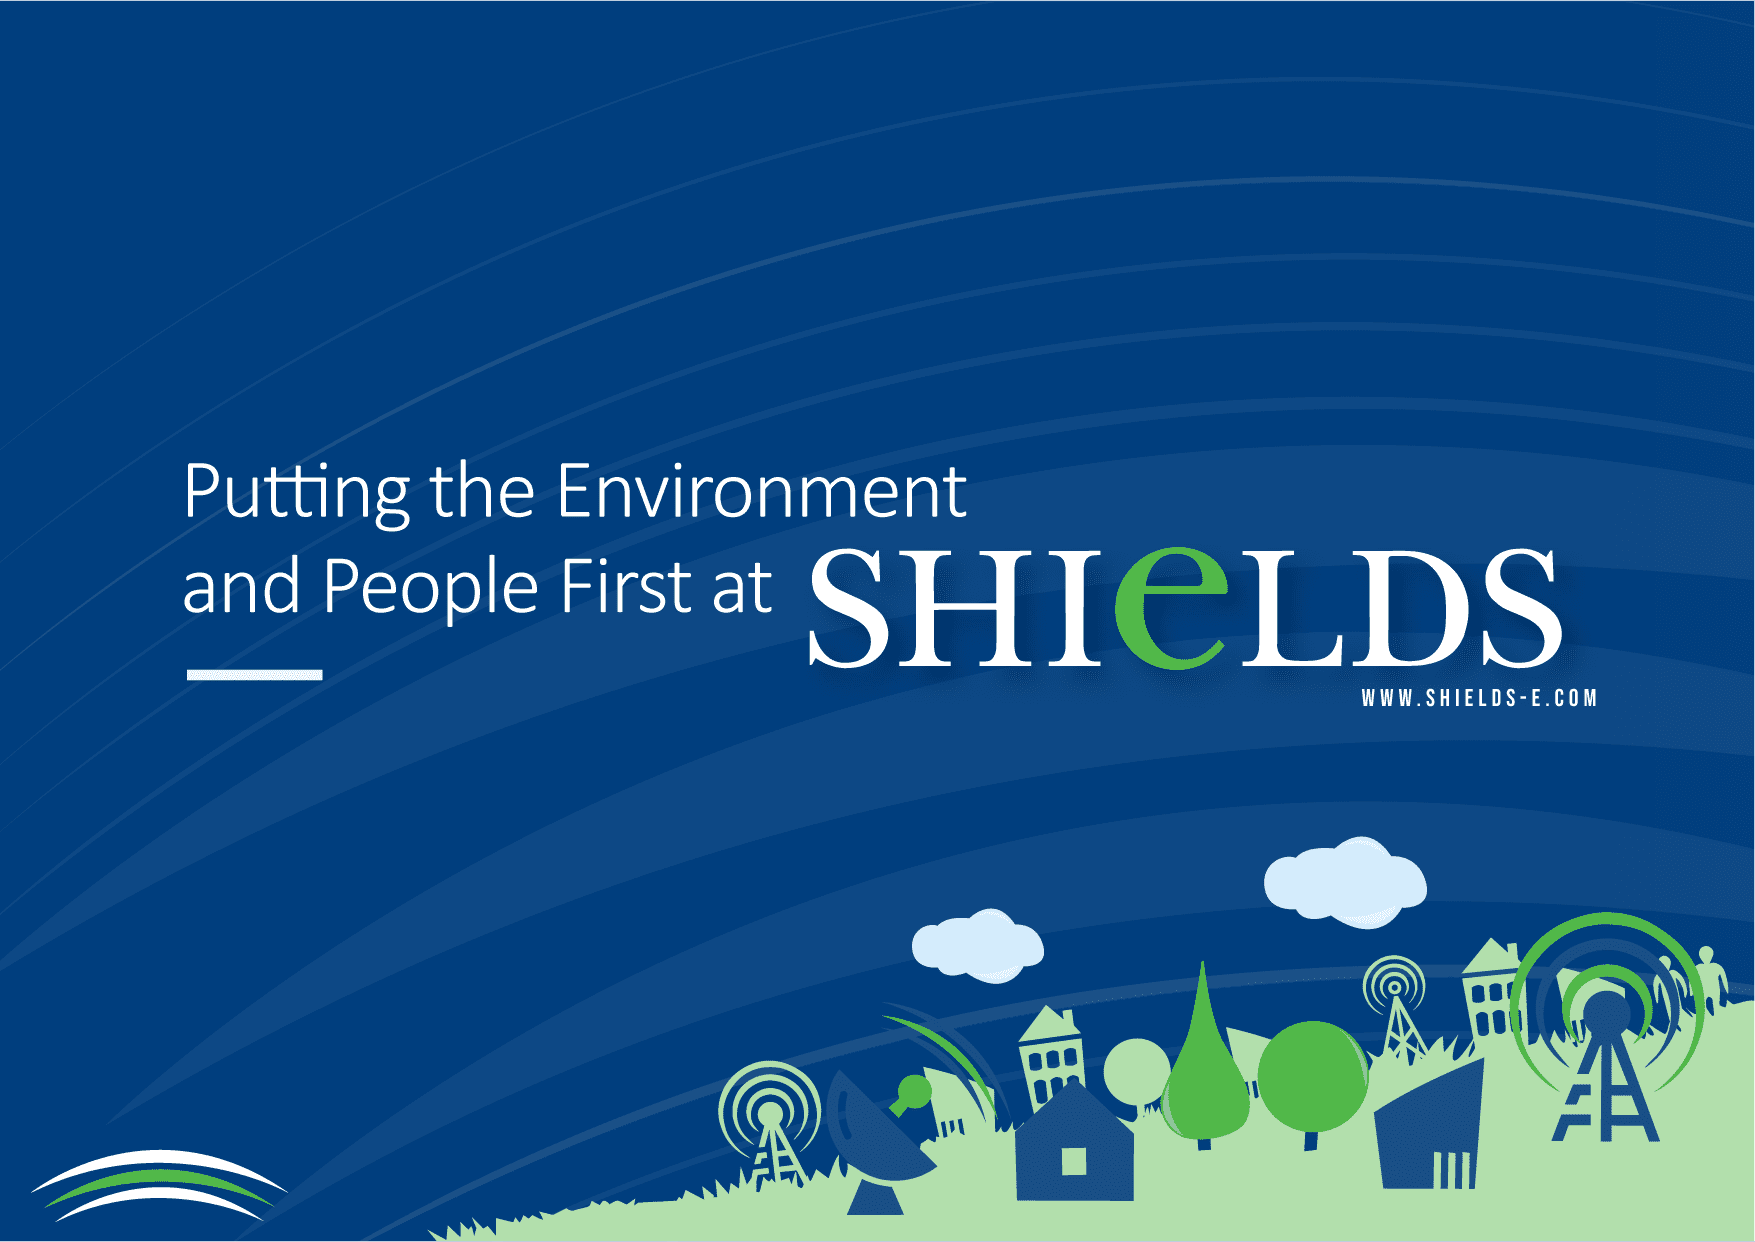 Putting the Environment and People First at Shields’ Blog header image